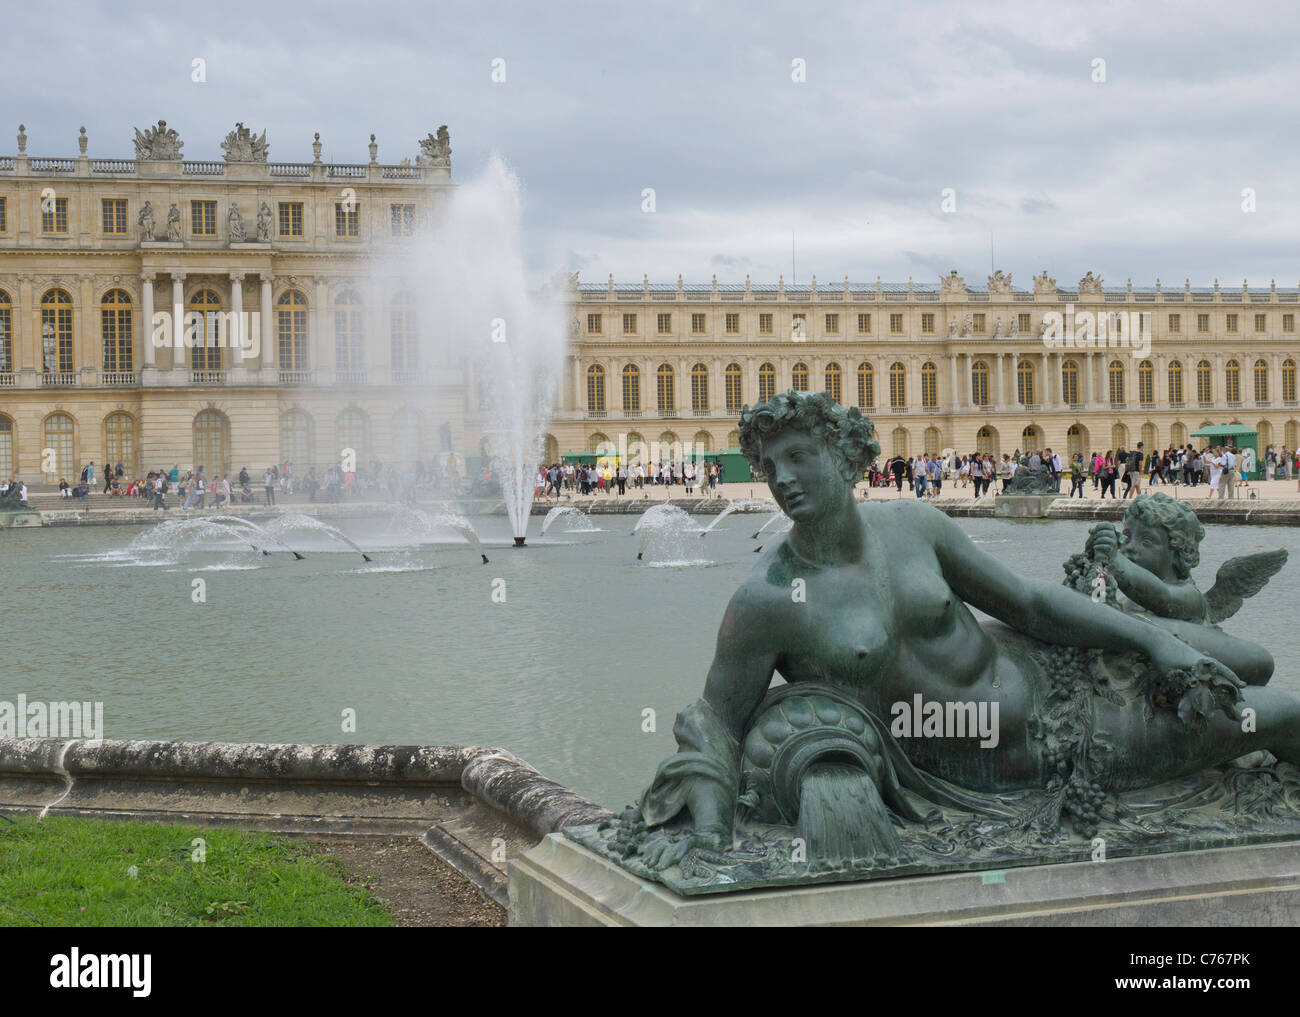 The Chateau of Versailles, Paris France. Flower beds, the Parterre, the fountains Stock Photo